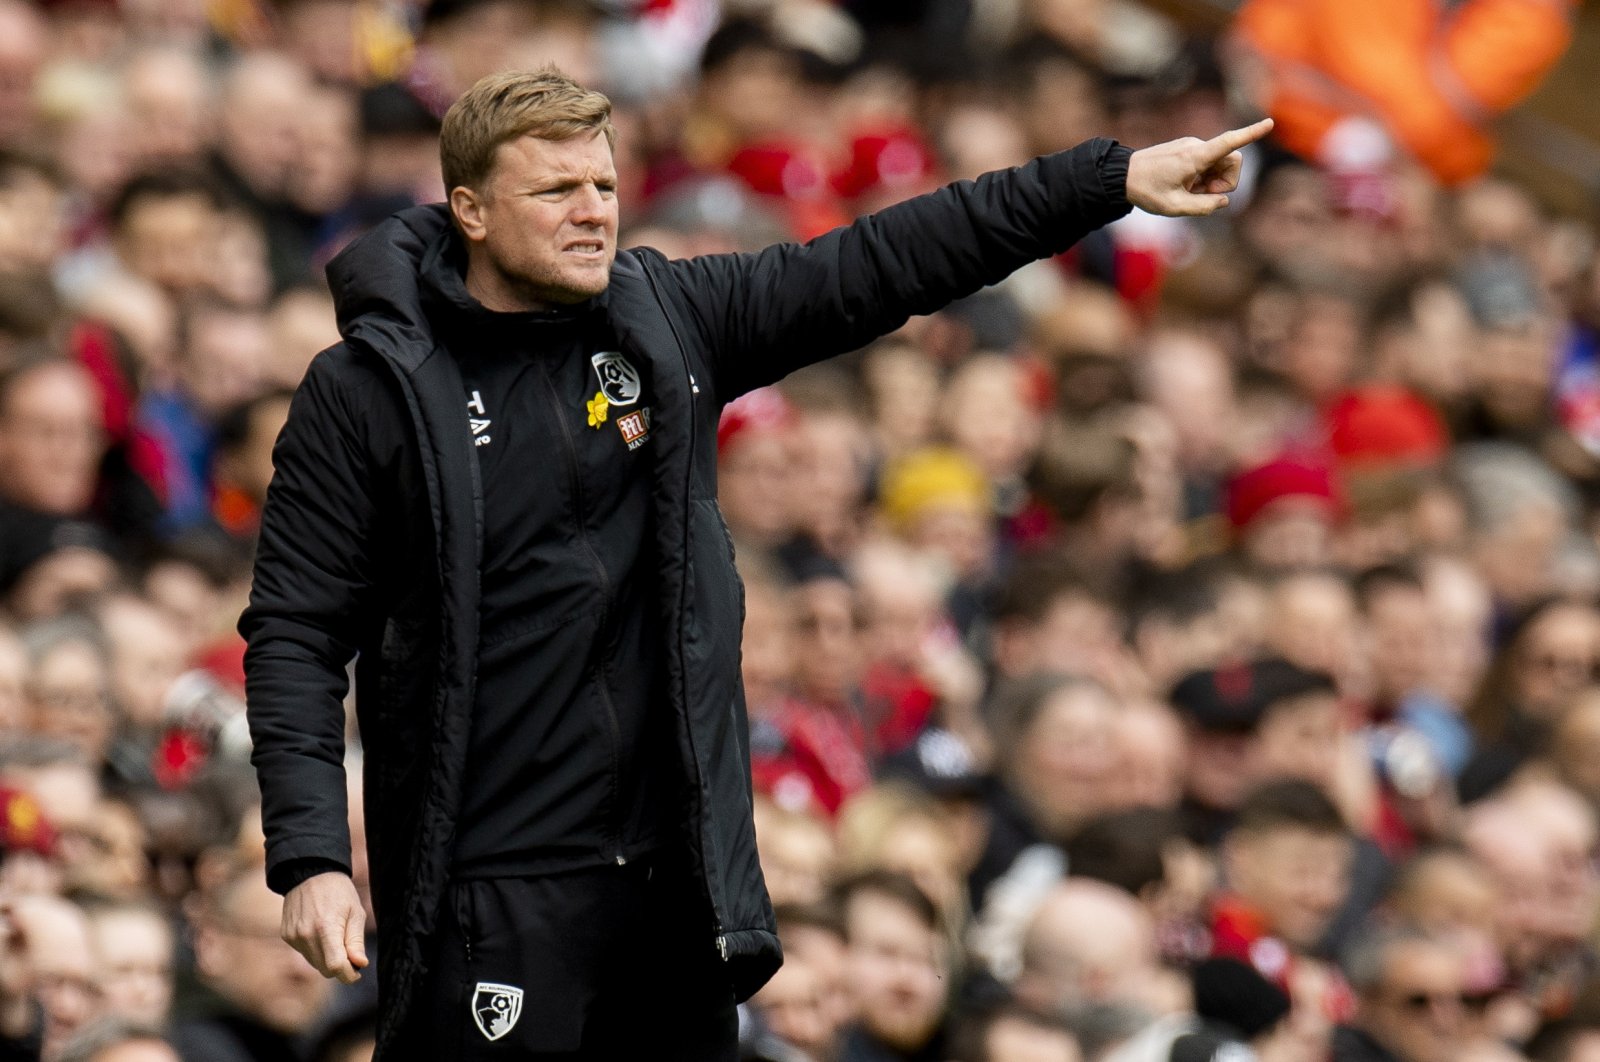 Bournemouth's manager Eddie Howe reacts during the English Premier League soccer match between Liverpool and Bournemouth at Anfield, Liverpool, Britain, March 7, 2020. (EPA Photo)